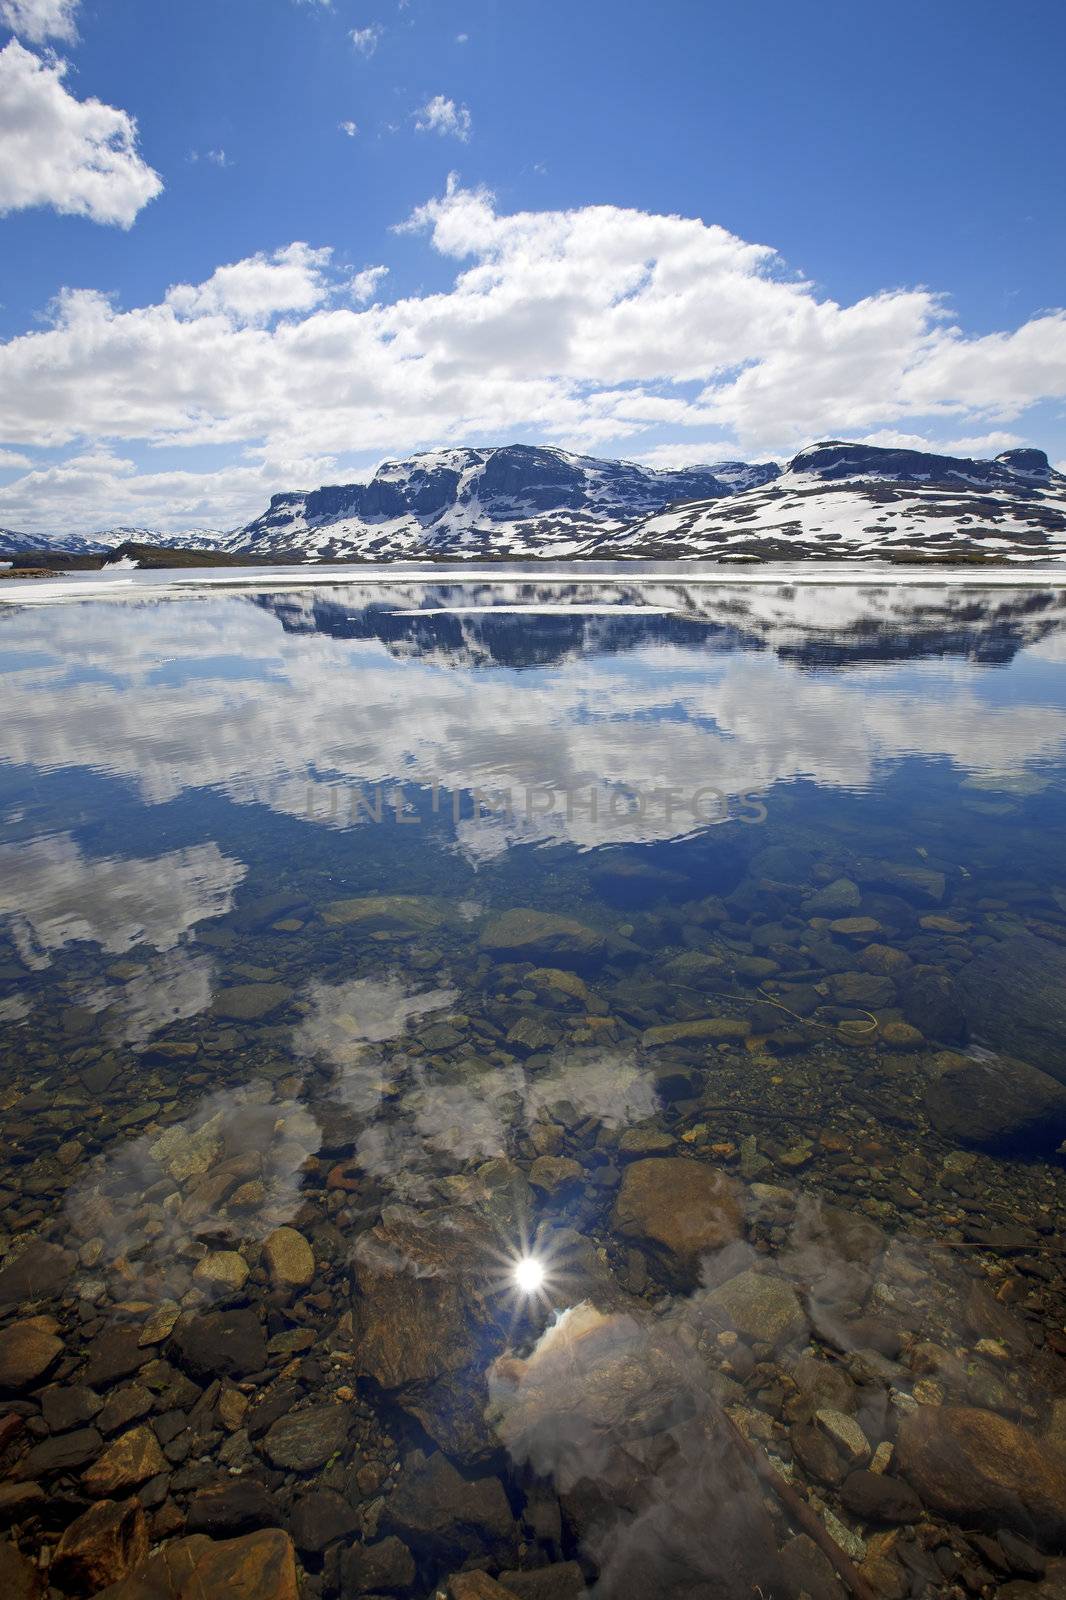 Snowcapped mountains reflecting in the water at Haukeli, Norway